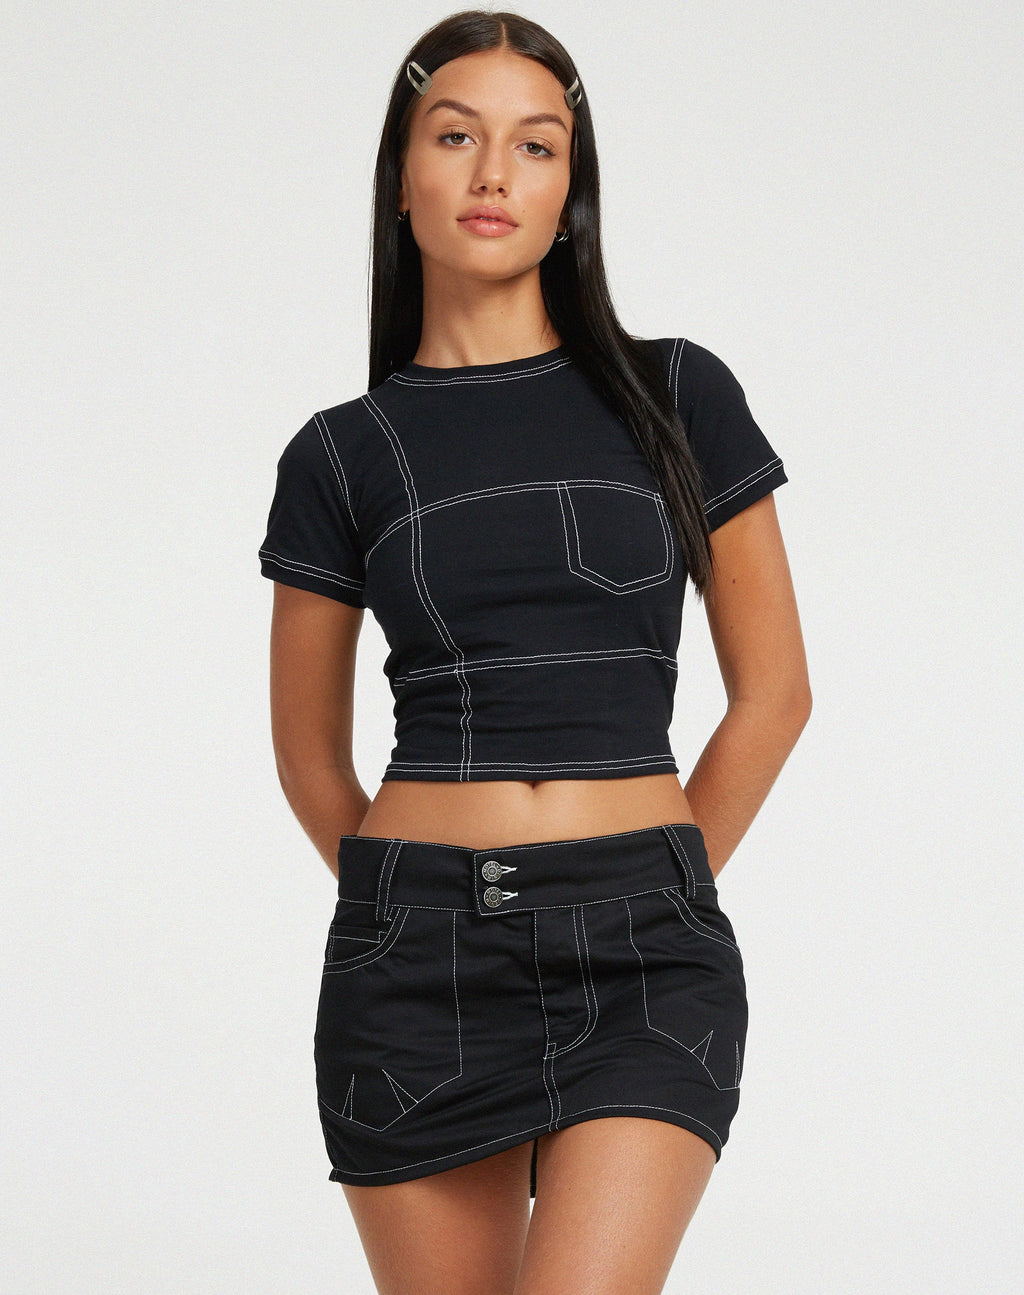 Shyla Cropped Tee in Black with White Stitch